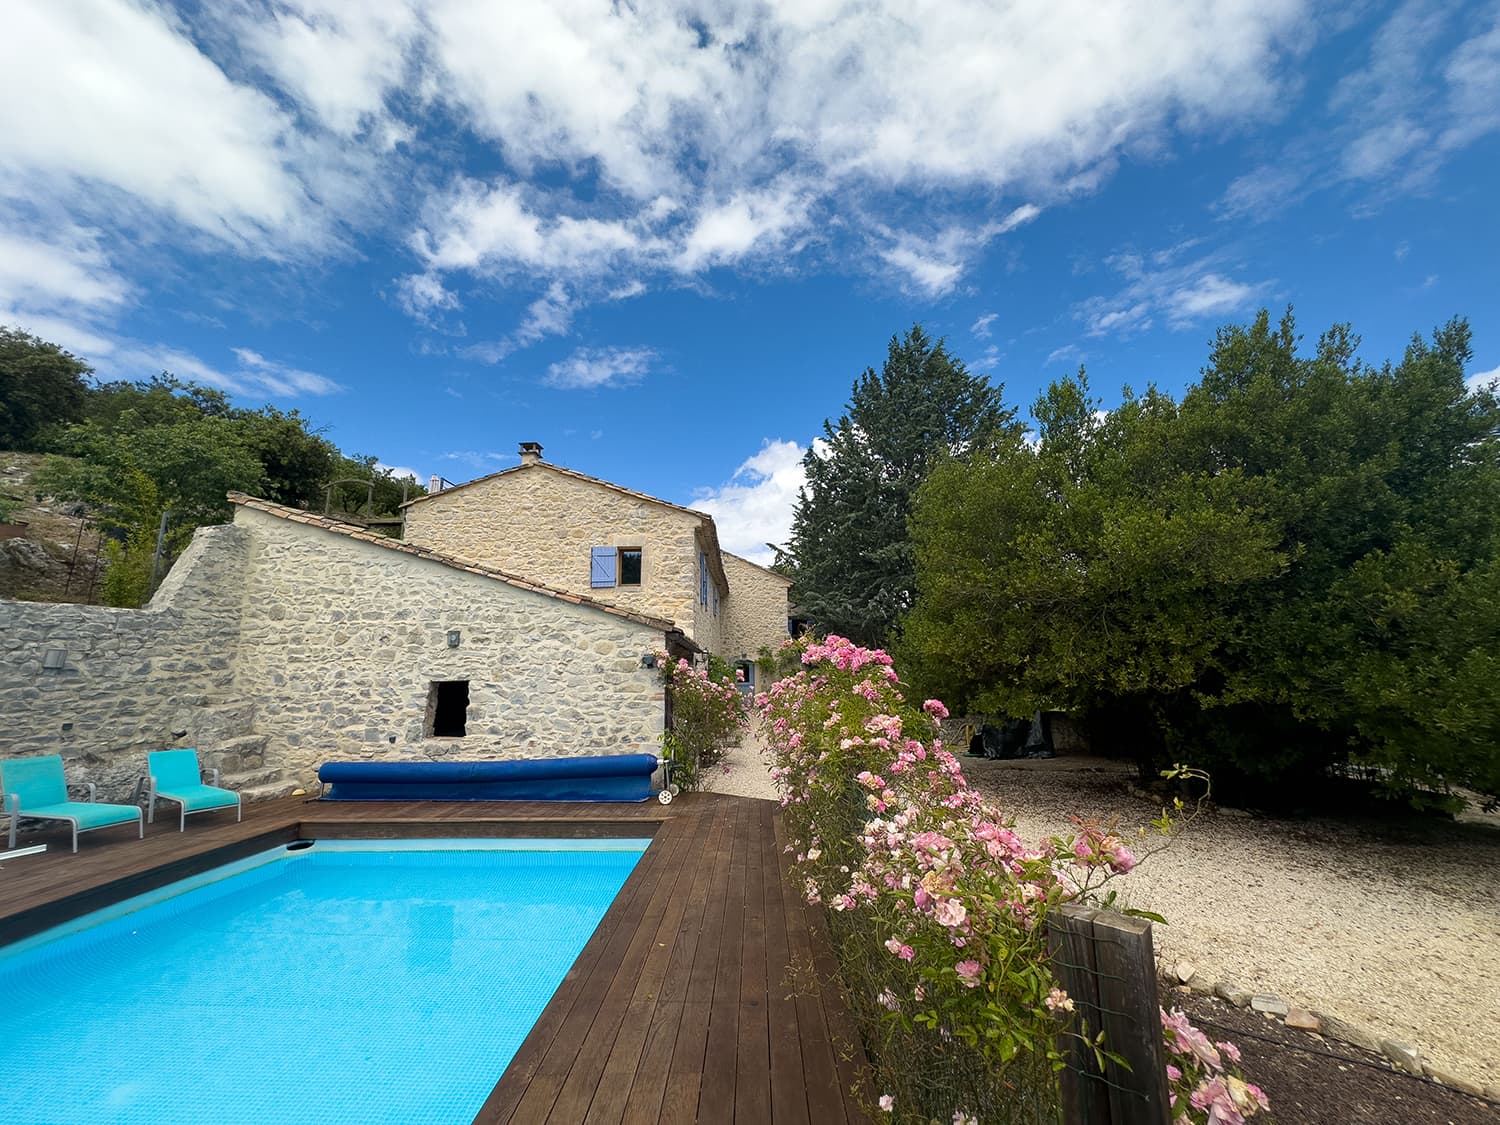 Holiday home with private pool in Gard, South of France